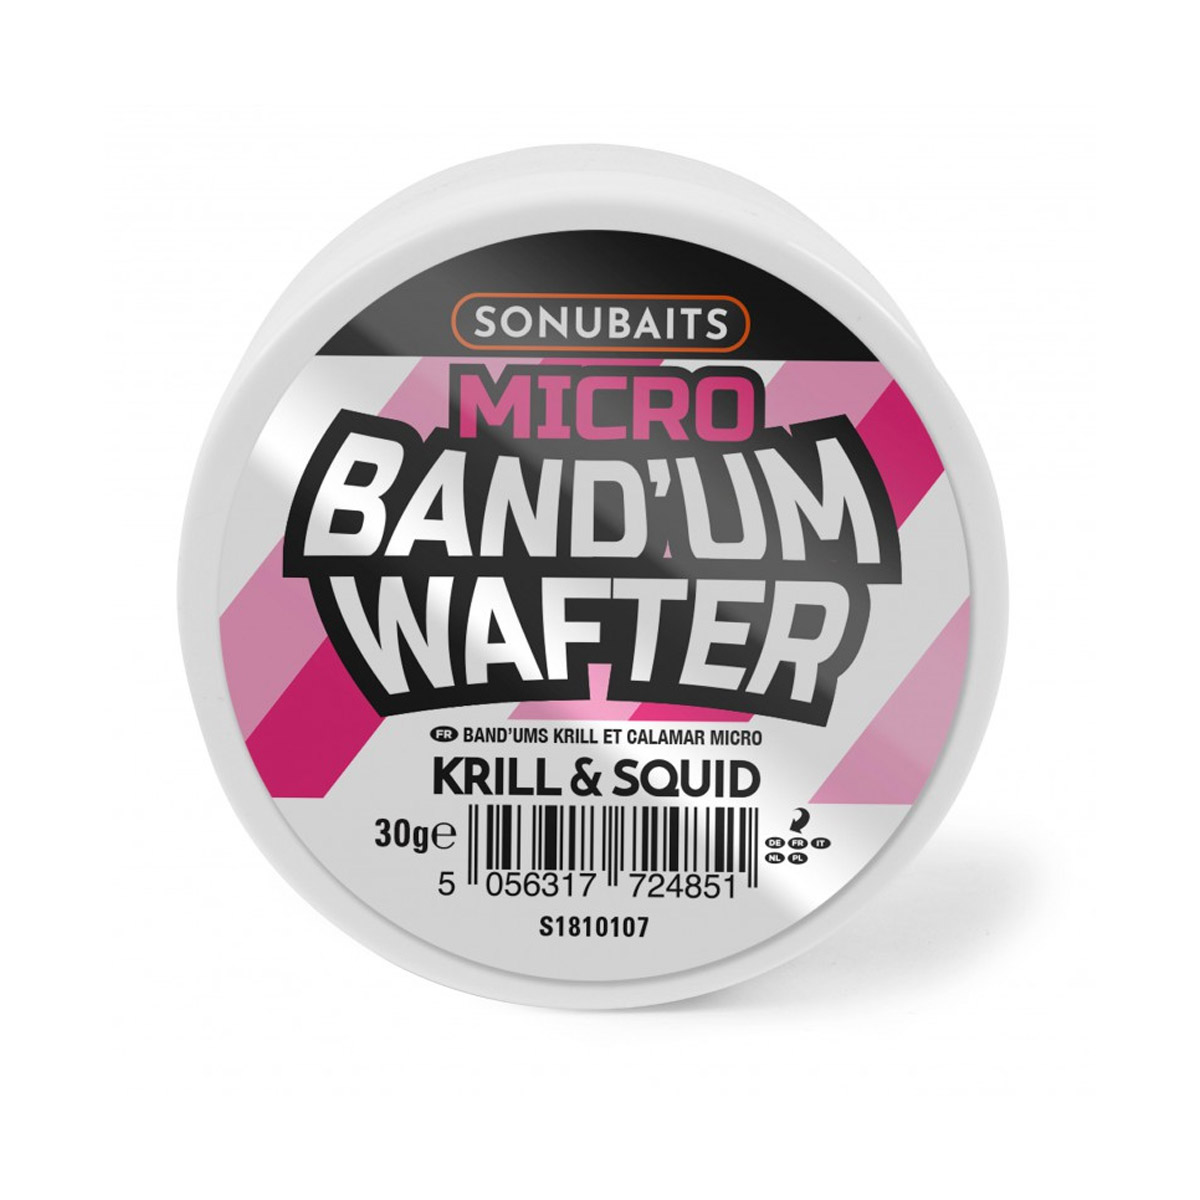 Sonubaits Micro Band'um Wafter Krill & Squid